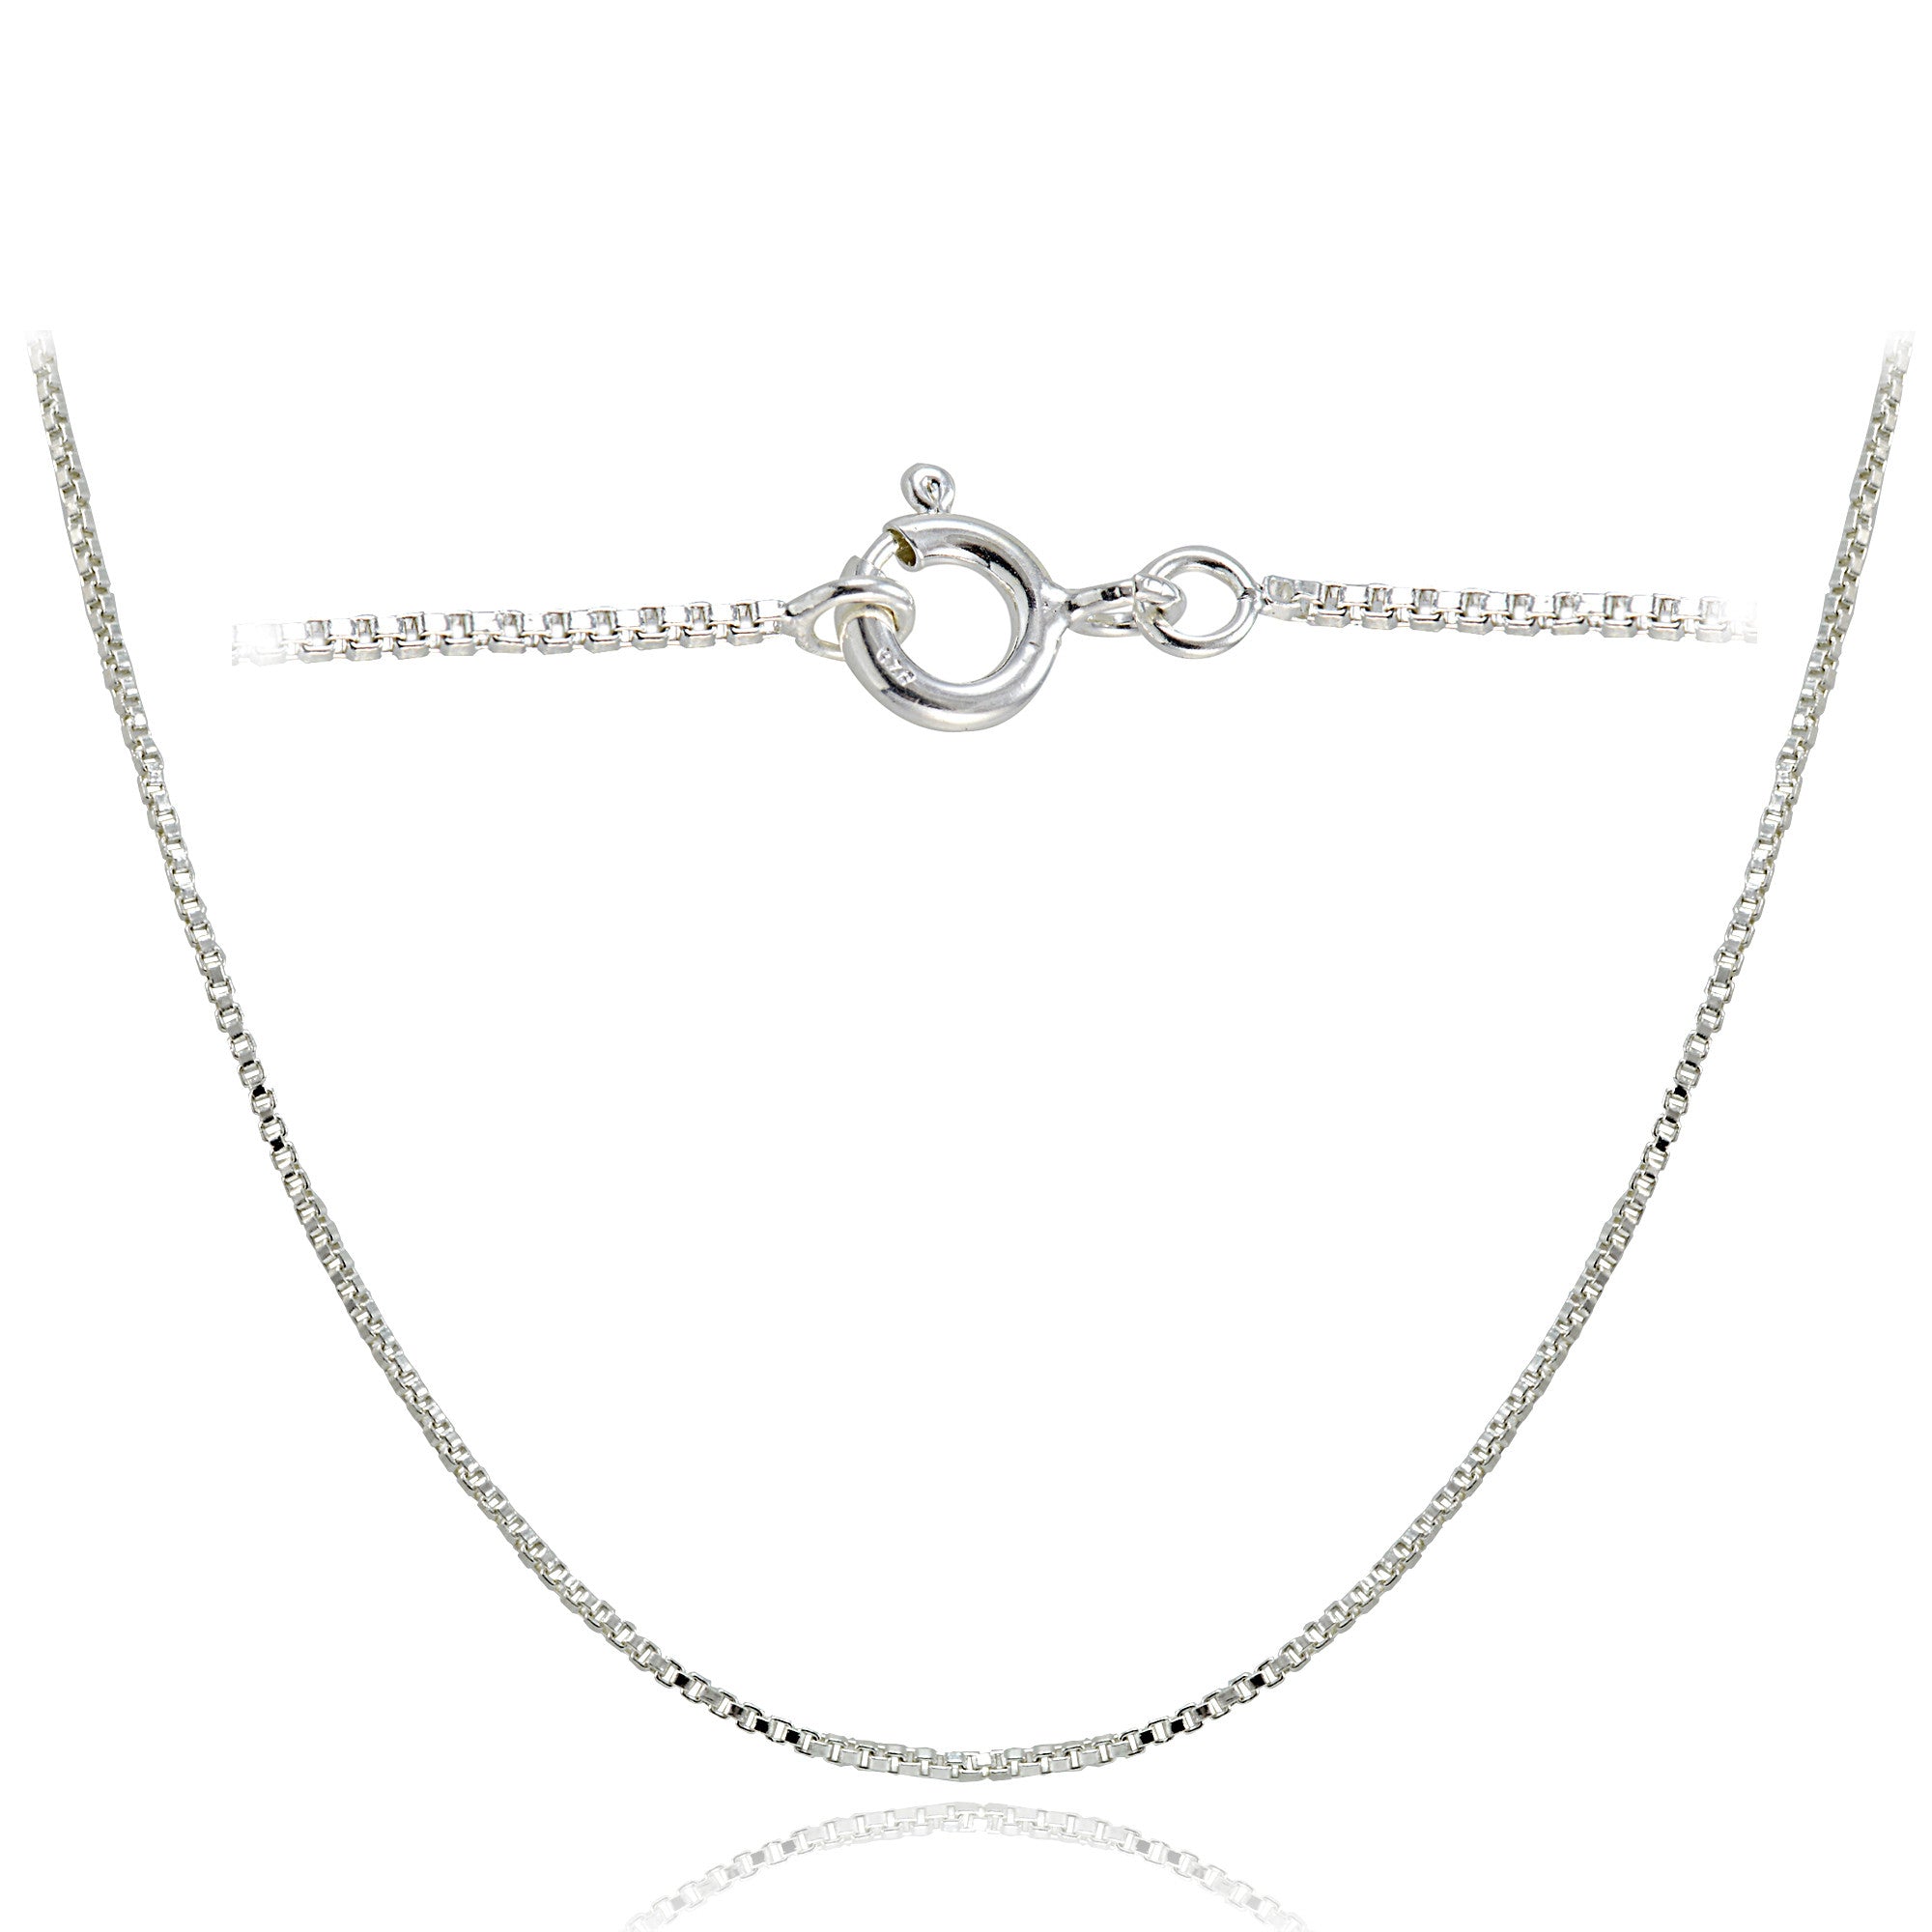 Sterling Silver Italian Box Chain Necklace - 24 Inches